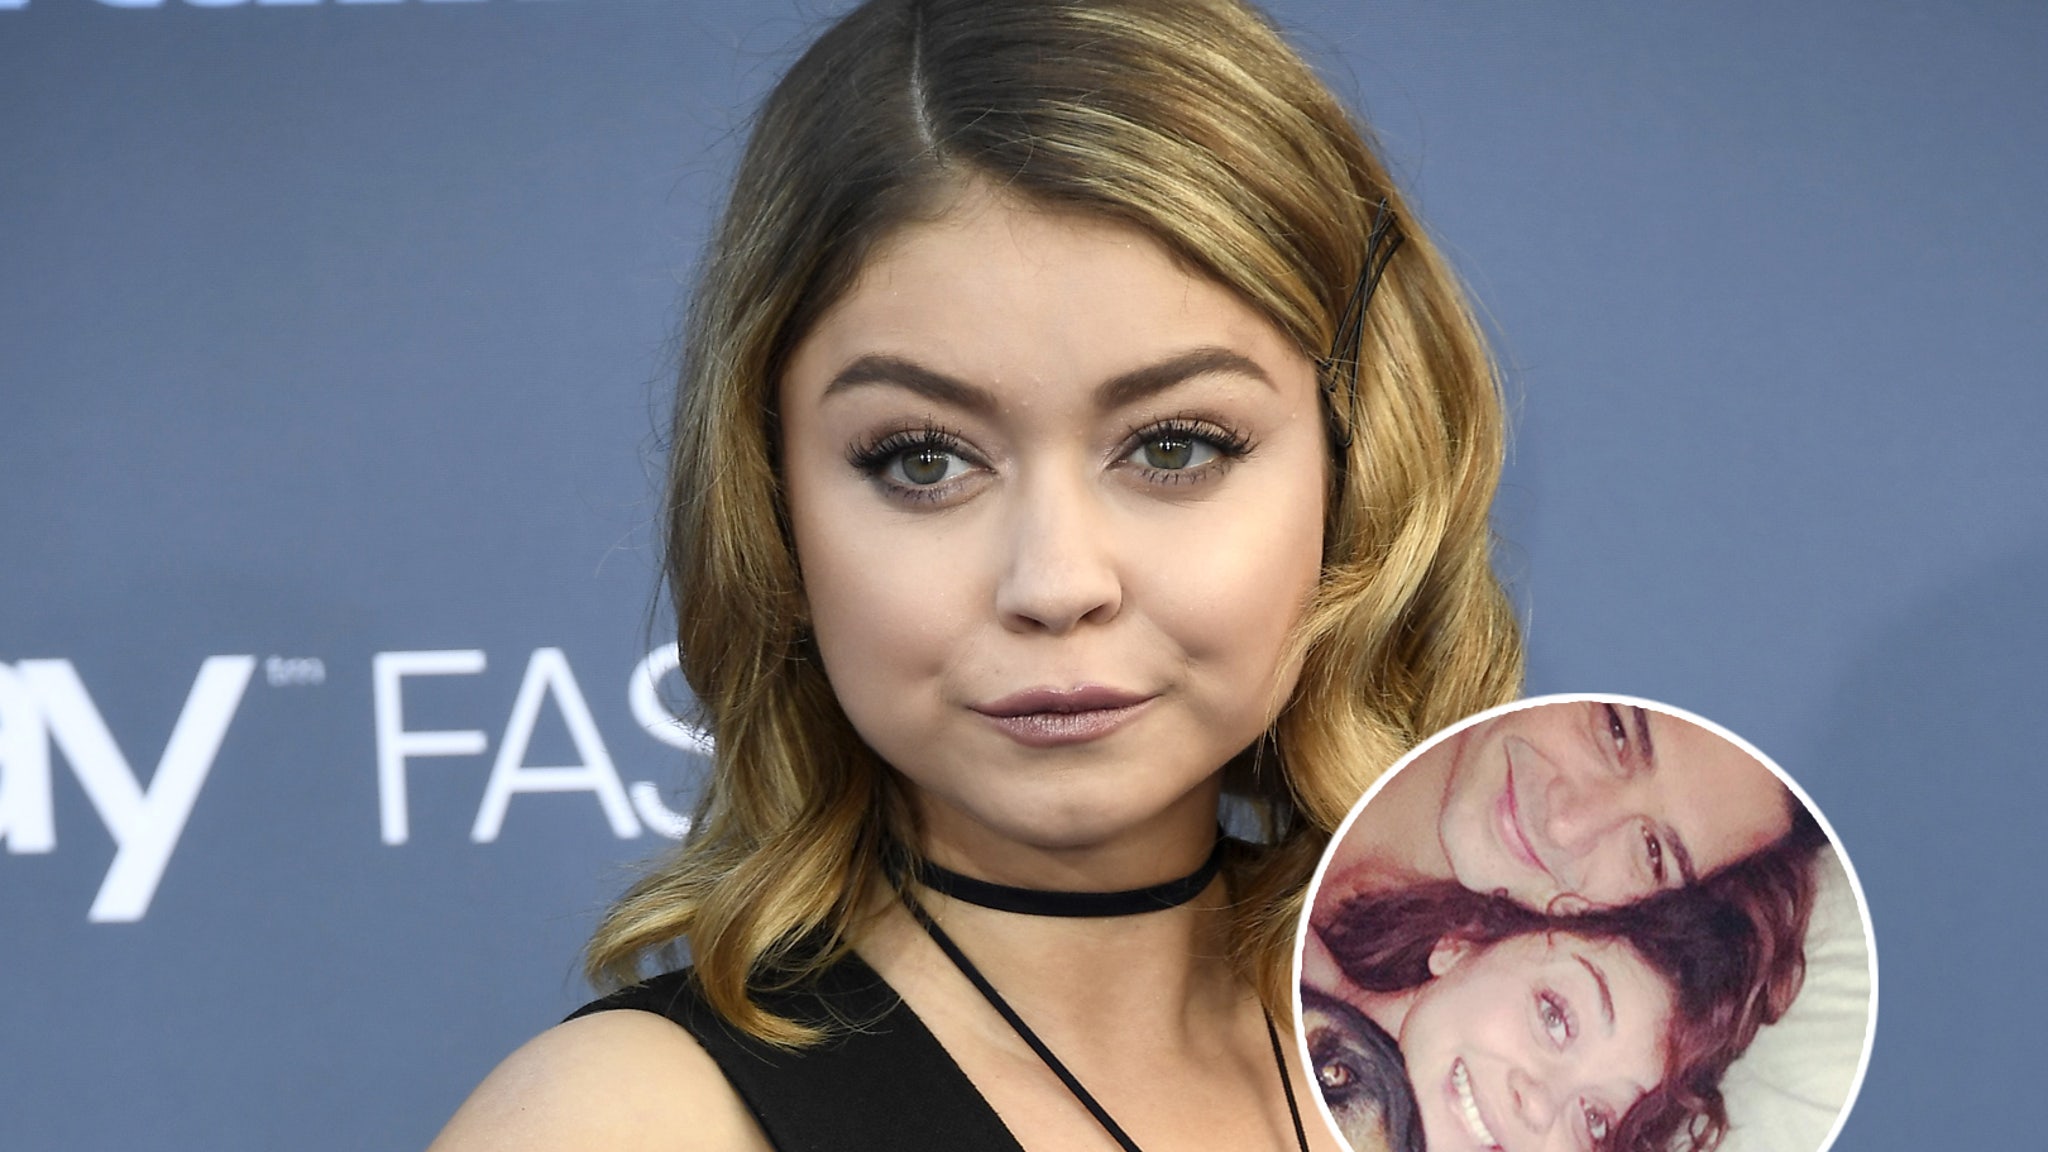 Sarah Hyland - Sarah Hyland Claps Back at Angry Fan Demanding 'KEEP YOUR SEXUAL LIFE  PRIVATE'